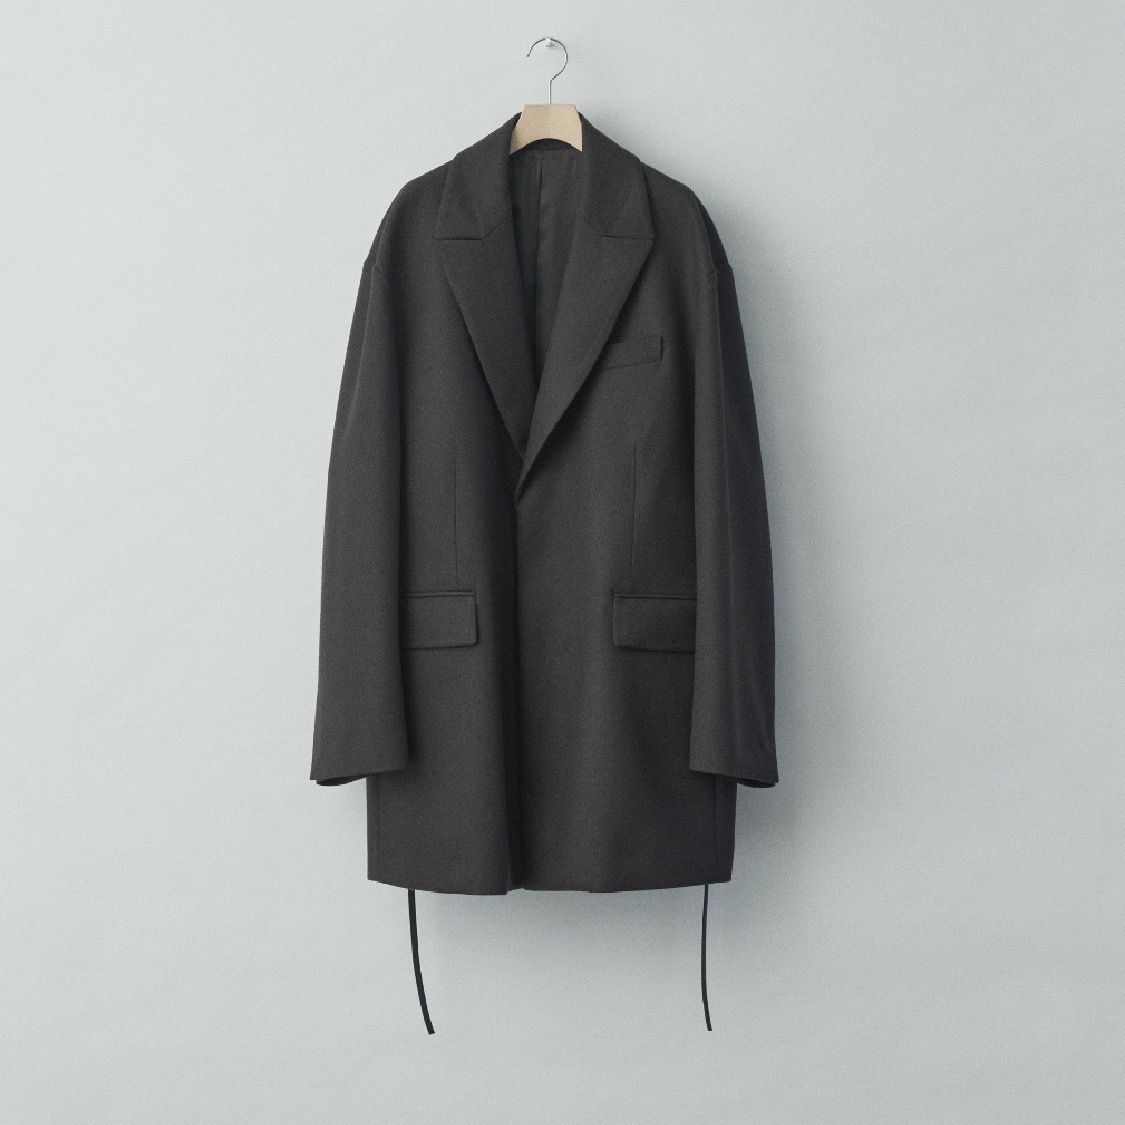 stein - 【残りわずか】Oversized Long Tailored Jacket | ACRMTSM ...